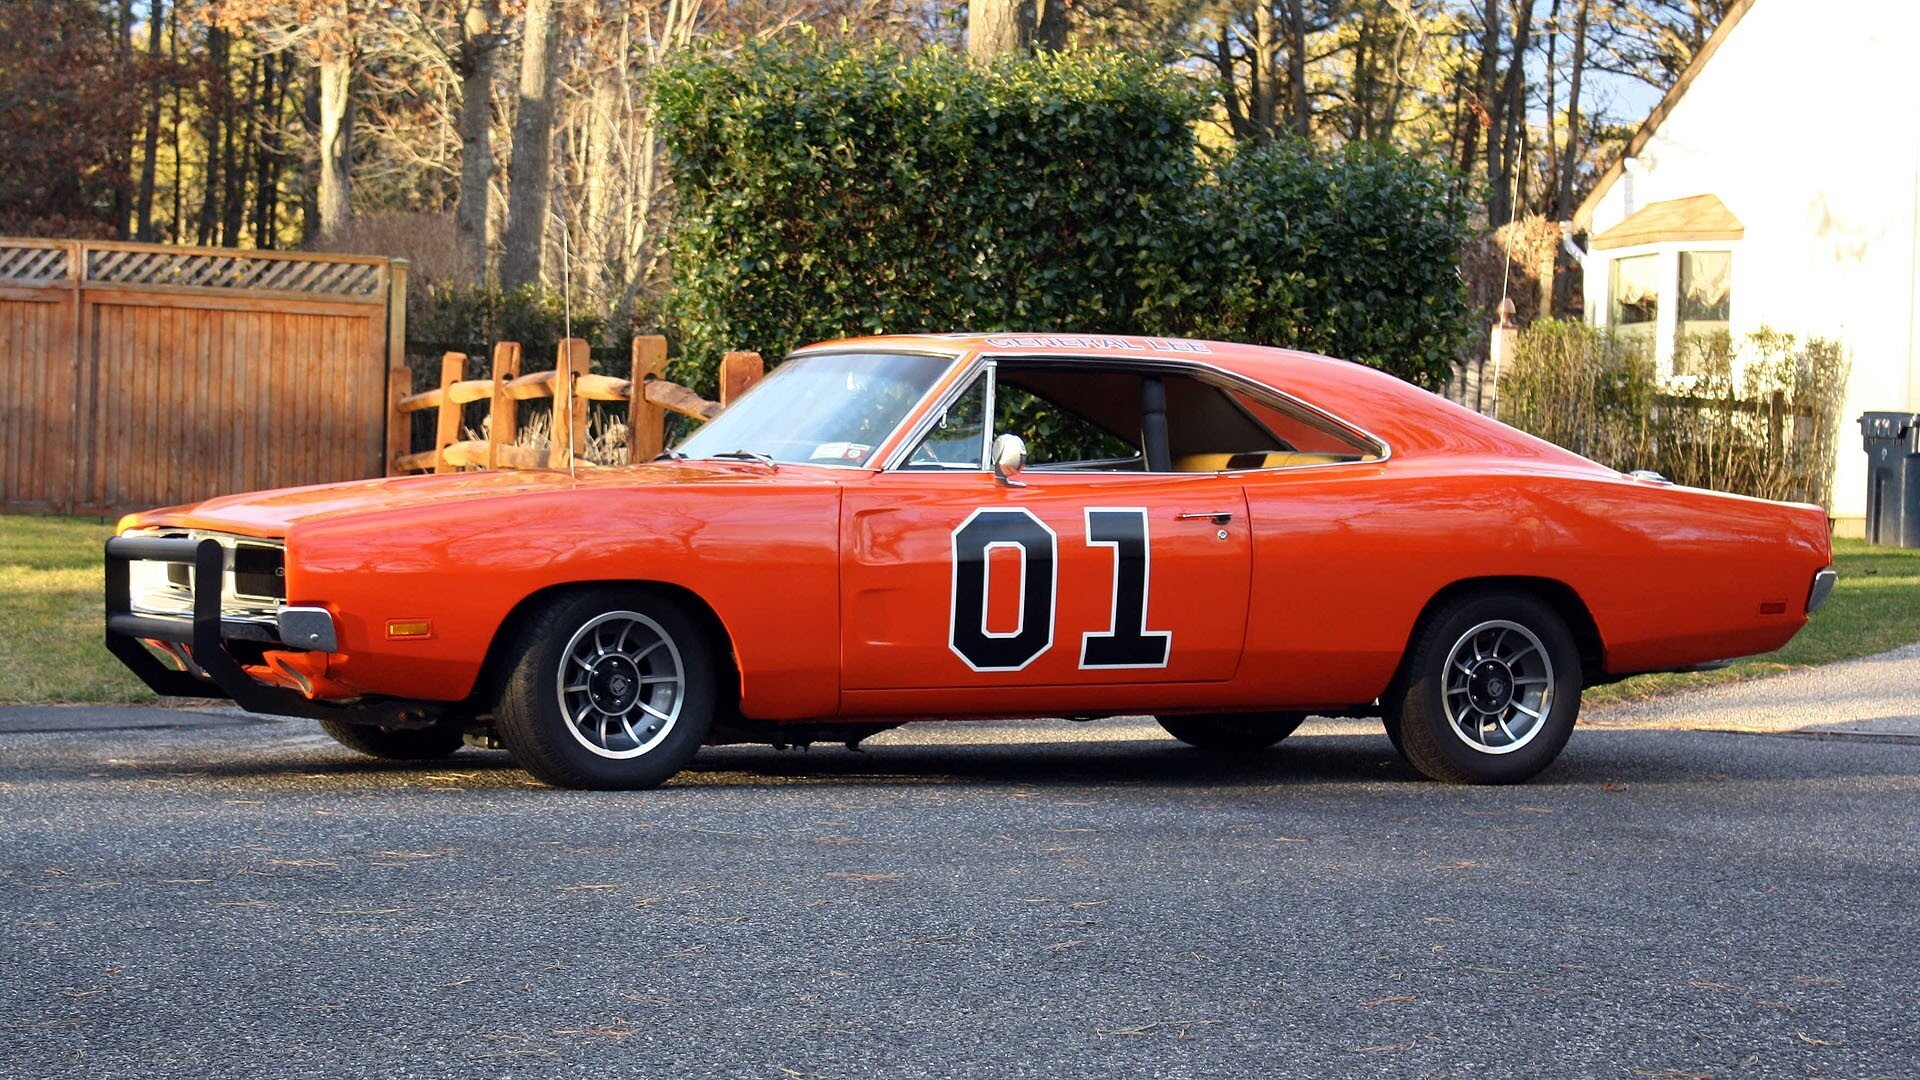 General Lee Car: A vintage Hot Rod, Charger, Dukes of Hazzard, The General Lee's distinctive insignia. 1920x1080 Full HD Wallpaper.